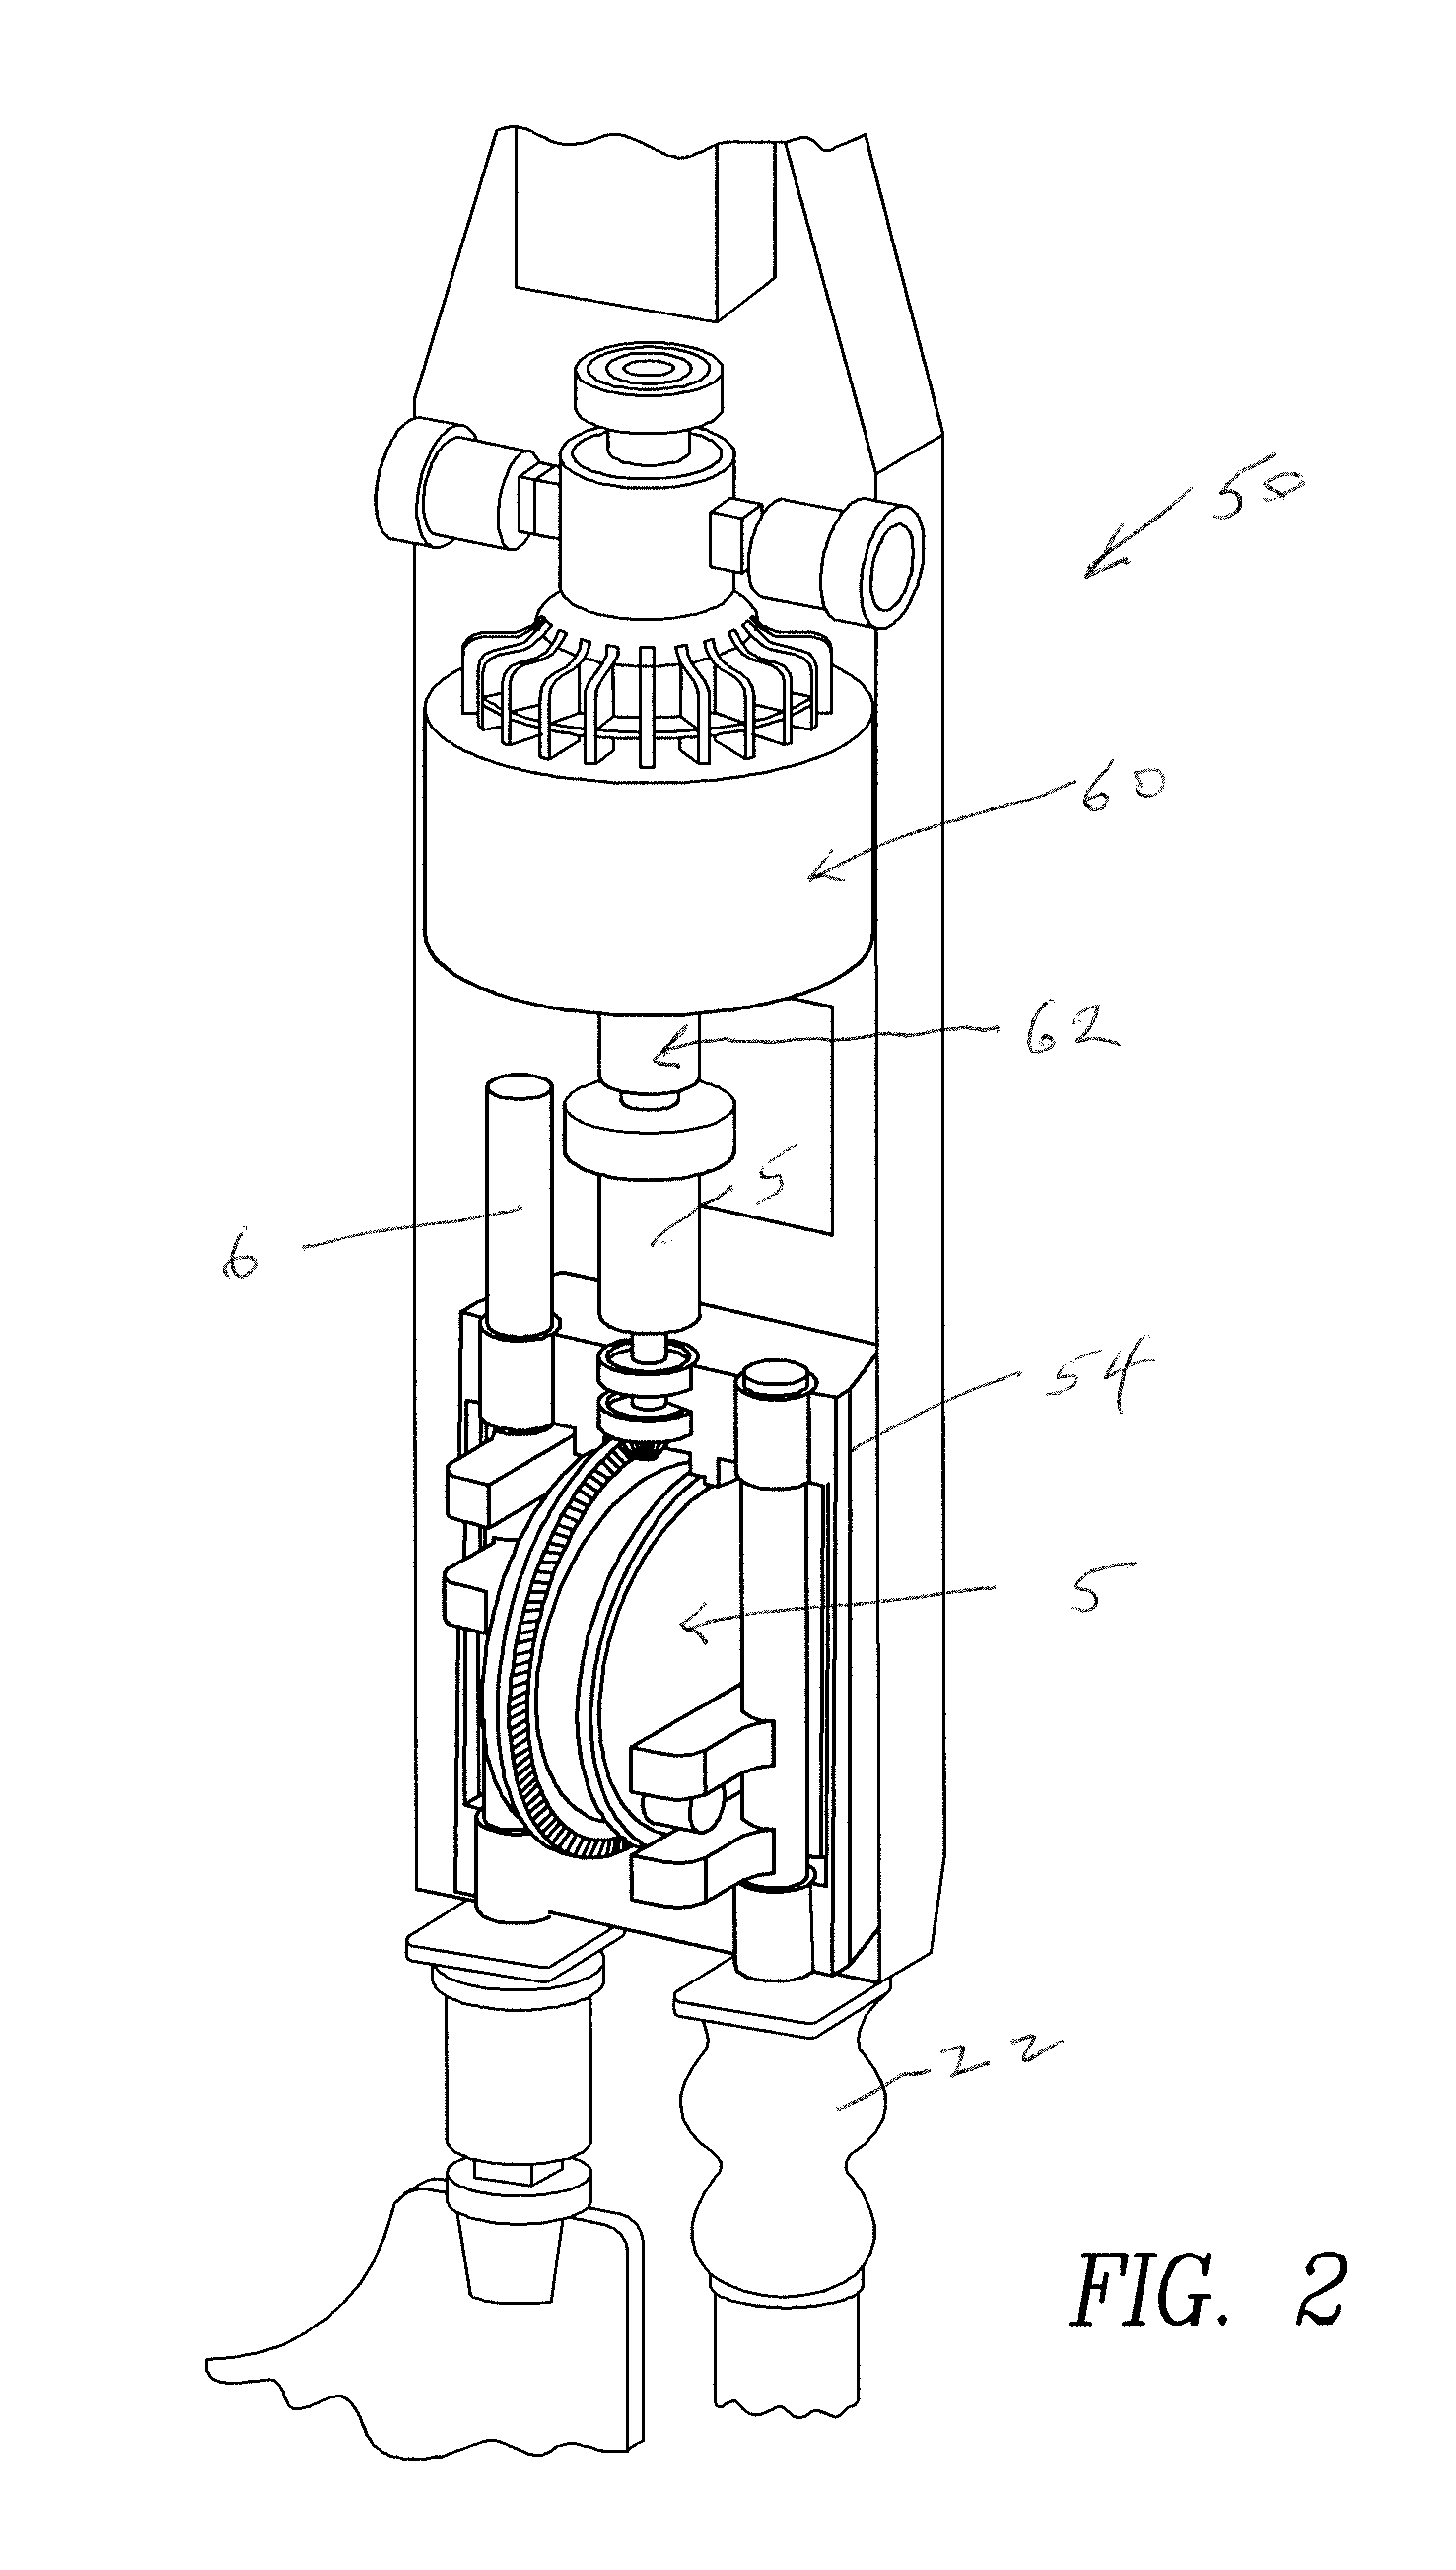 Portable ice breaking tool with two reciprocating blades